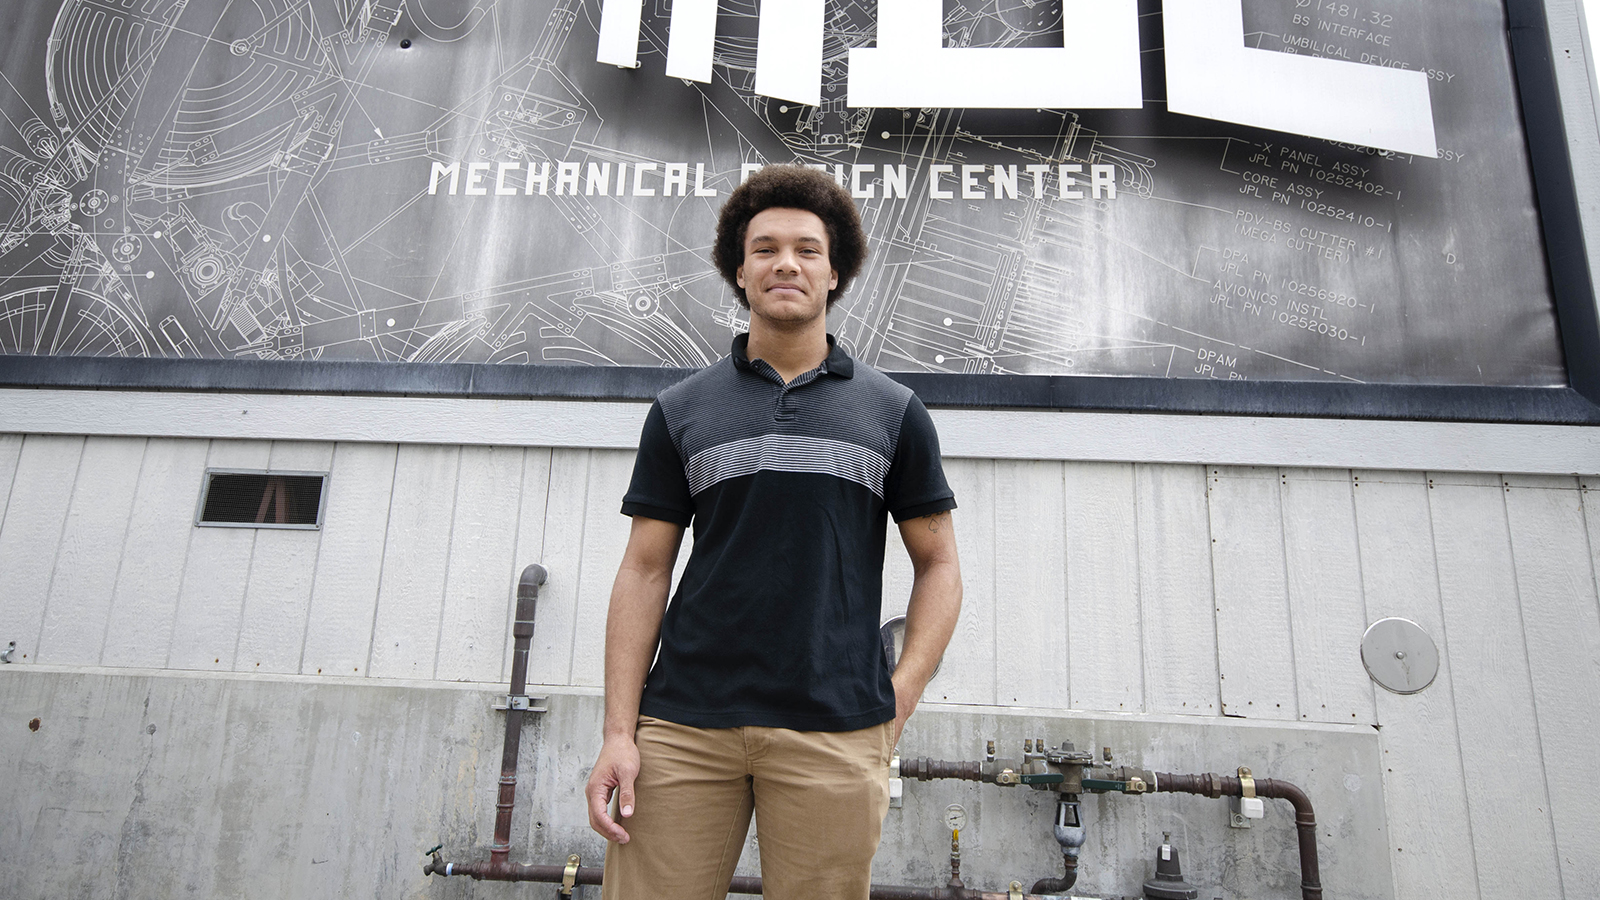 Brandon Ethridge stands in front of a mural made to look like a blueprint on the Mechanical Design Building at JPL.